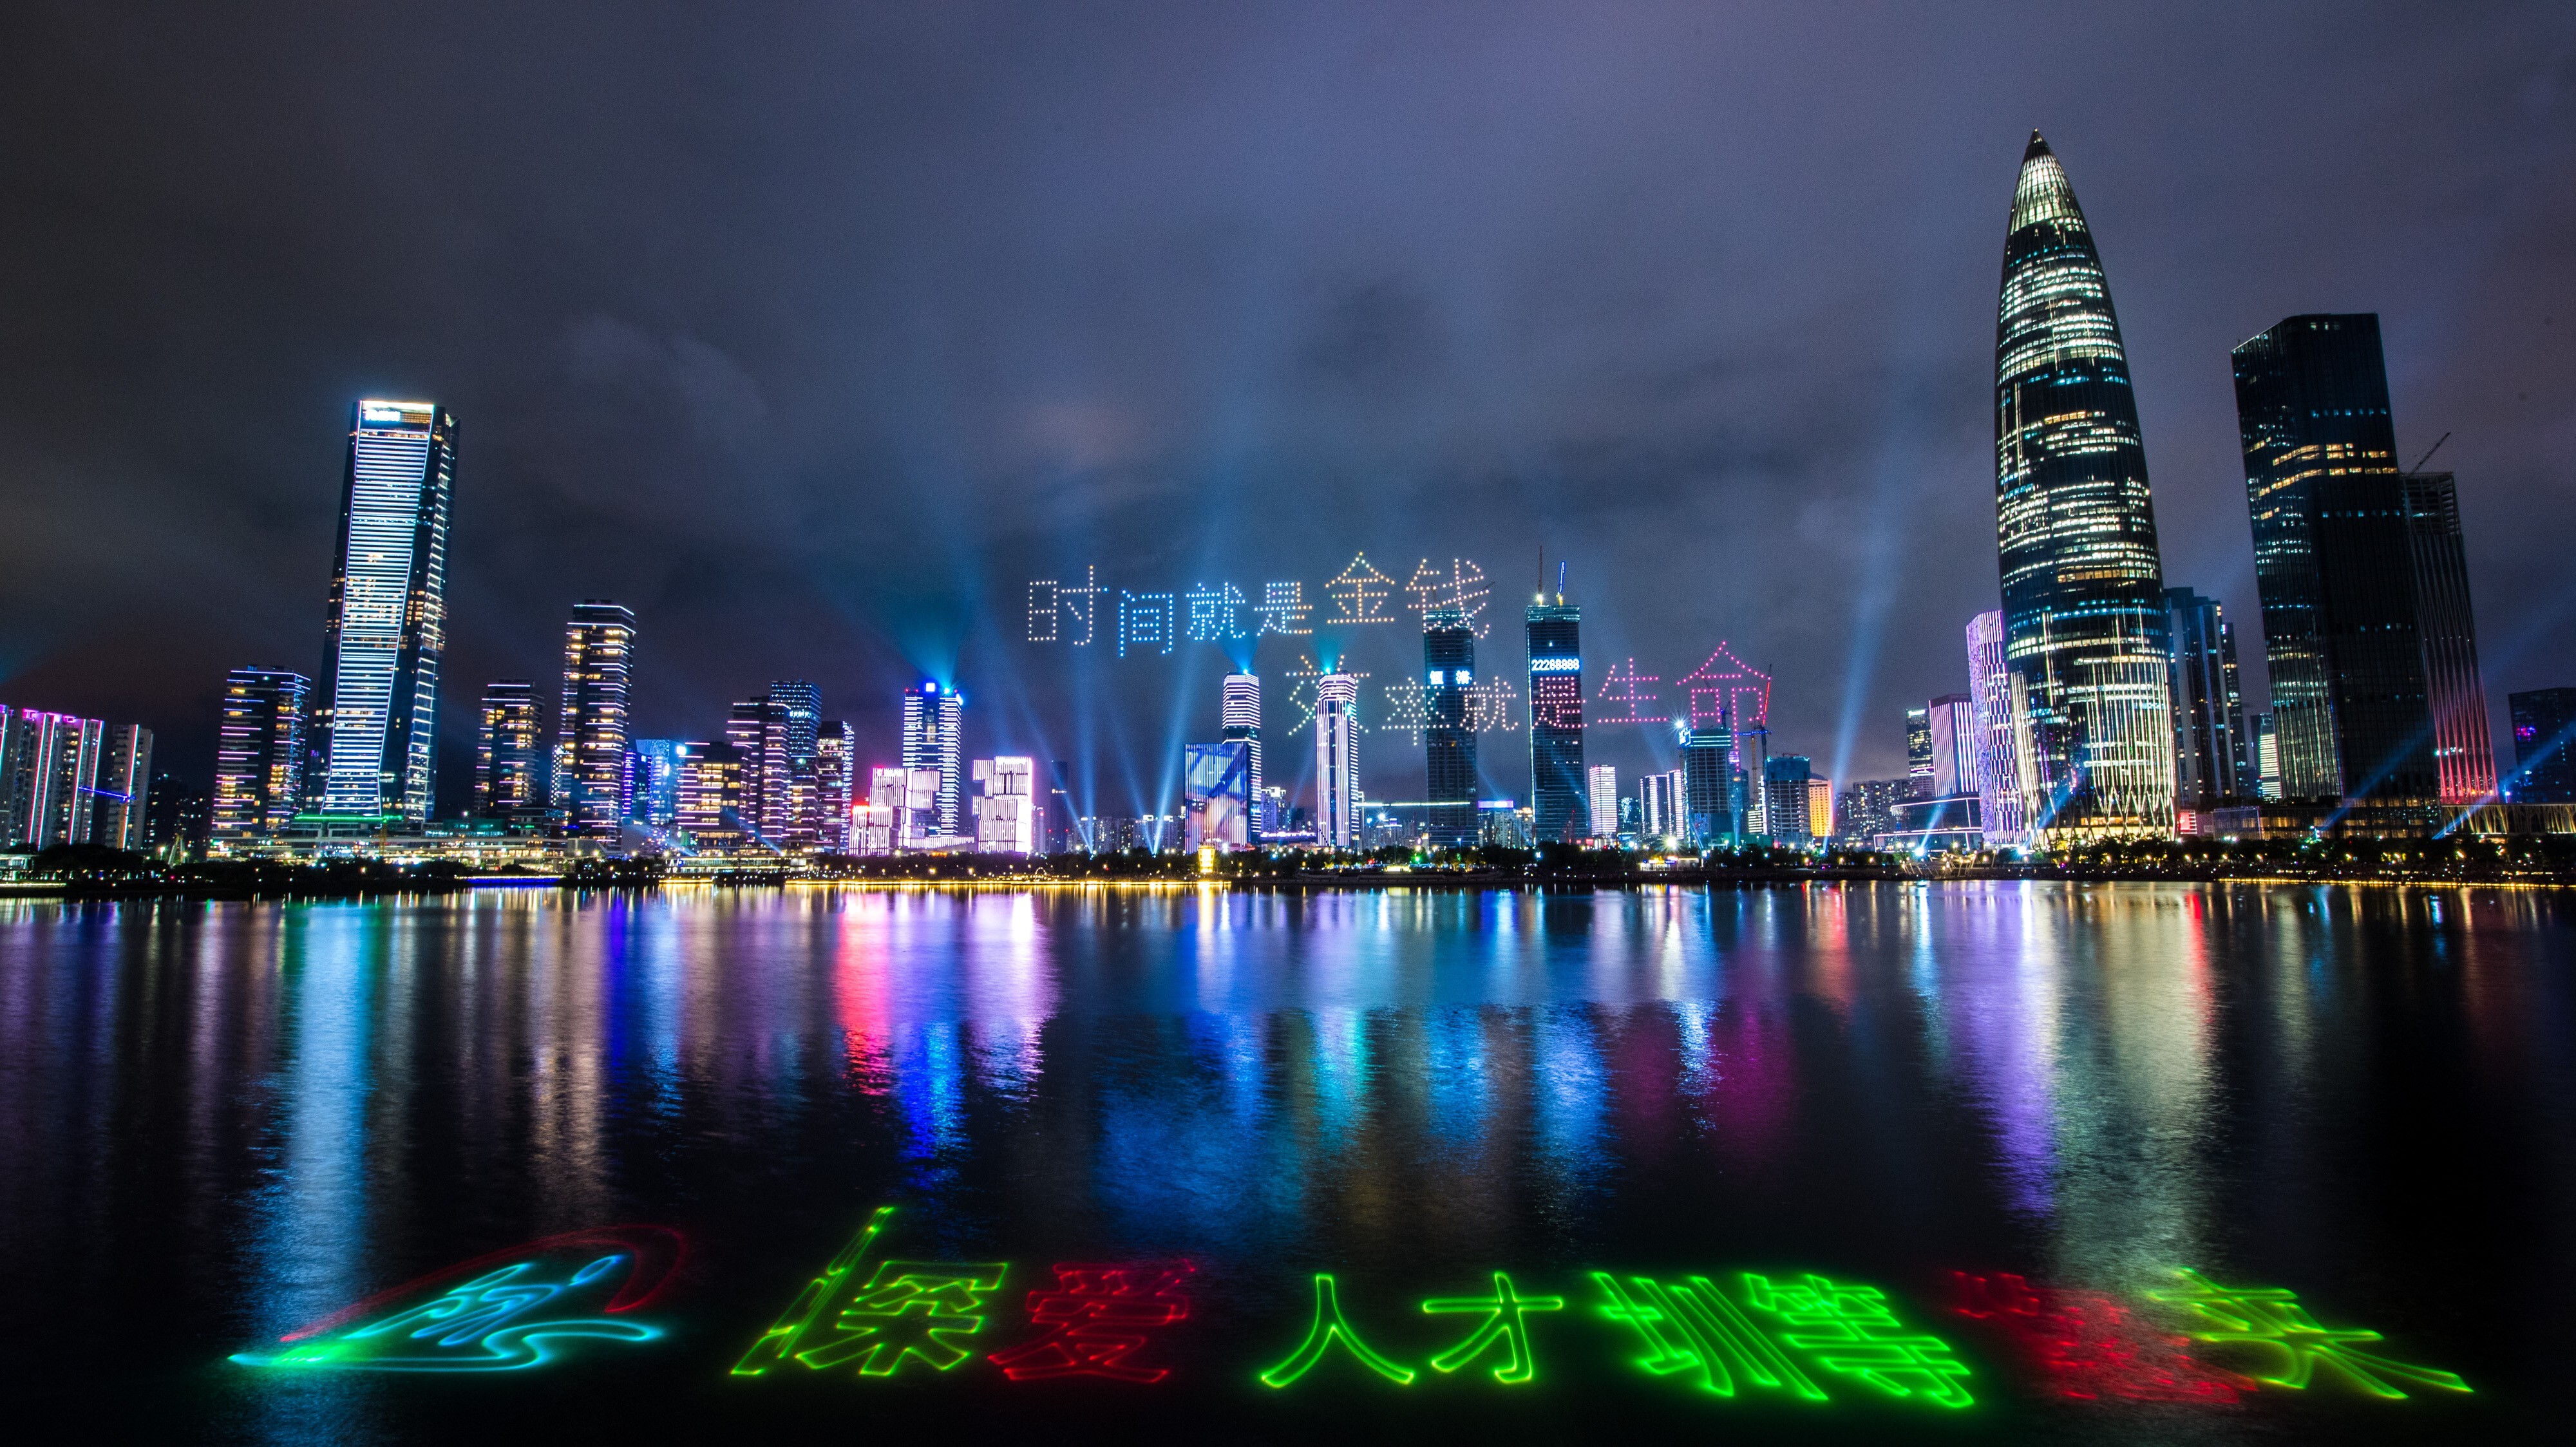 A light show performed with 826 drones to celebrate the 40th anniversary of the establishment of the Shenzhen Special Economic Zone was held in Shenzhen on August 26. Photo: Xinhua